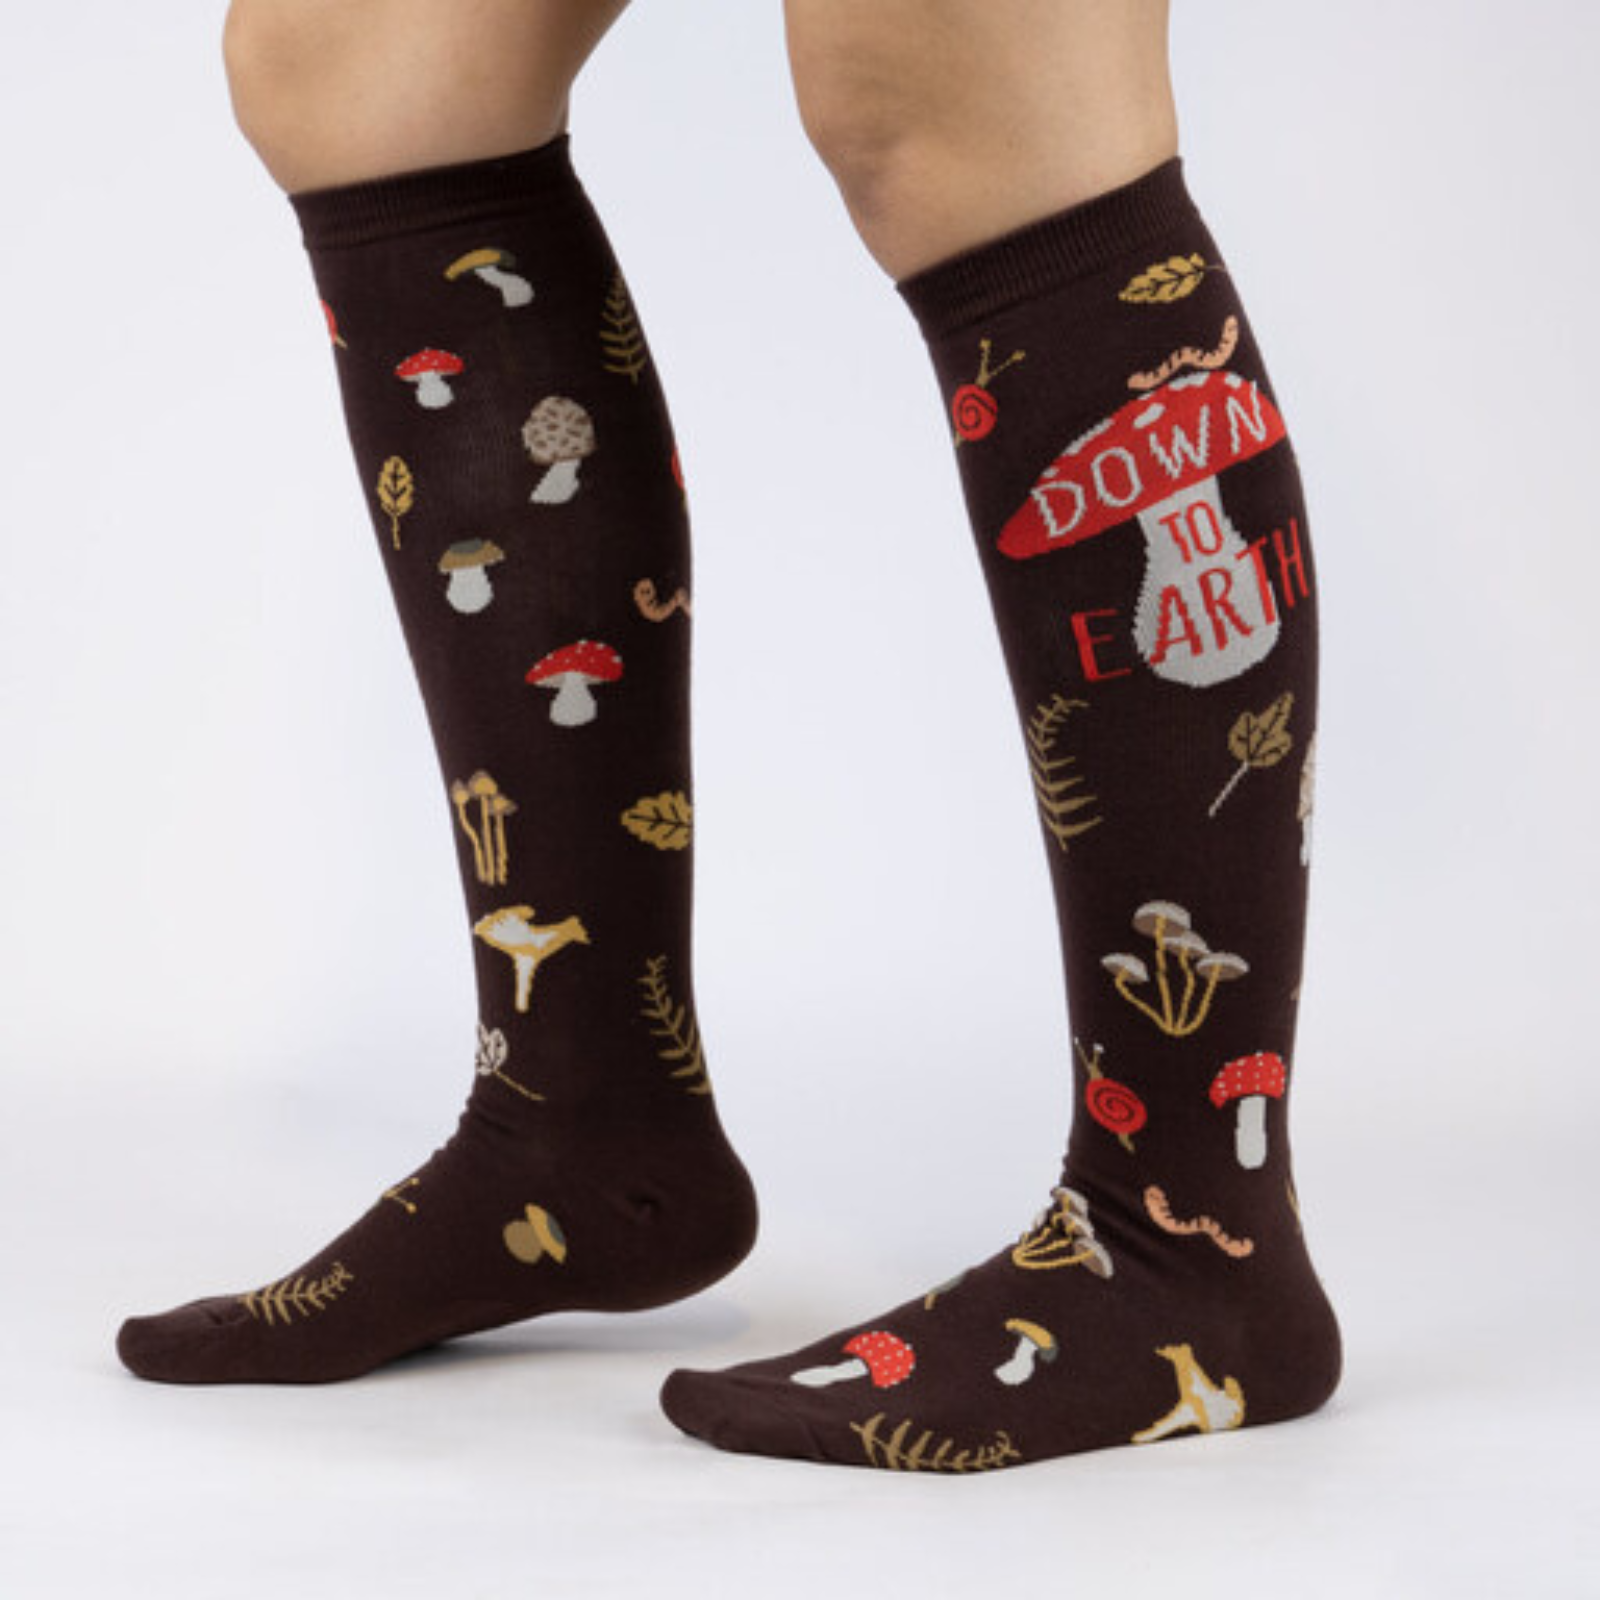 Sock It To Me Down to Earth women's knee high sock featuring brown sock with different mushrooms all over and the phrase "Down to Earth". Socks worn by model seen from side. 